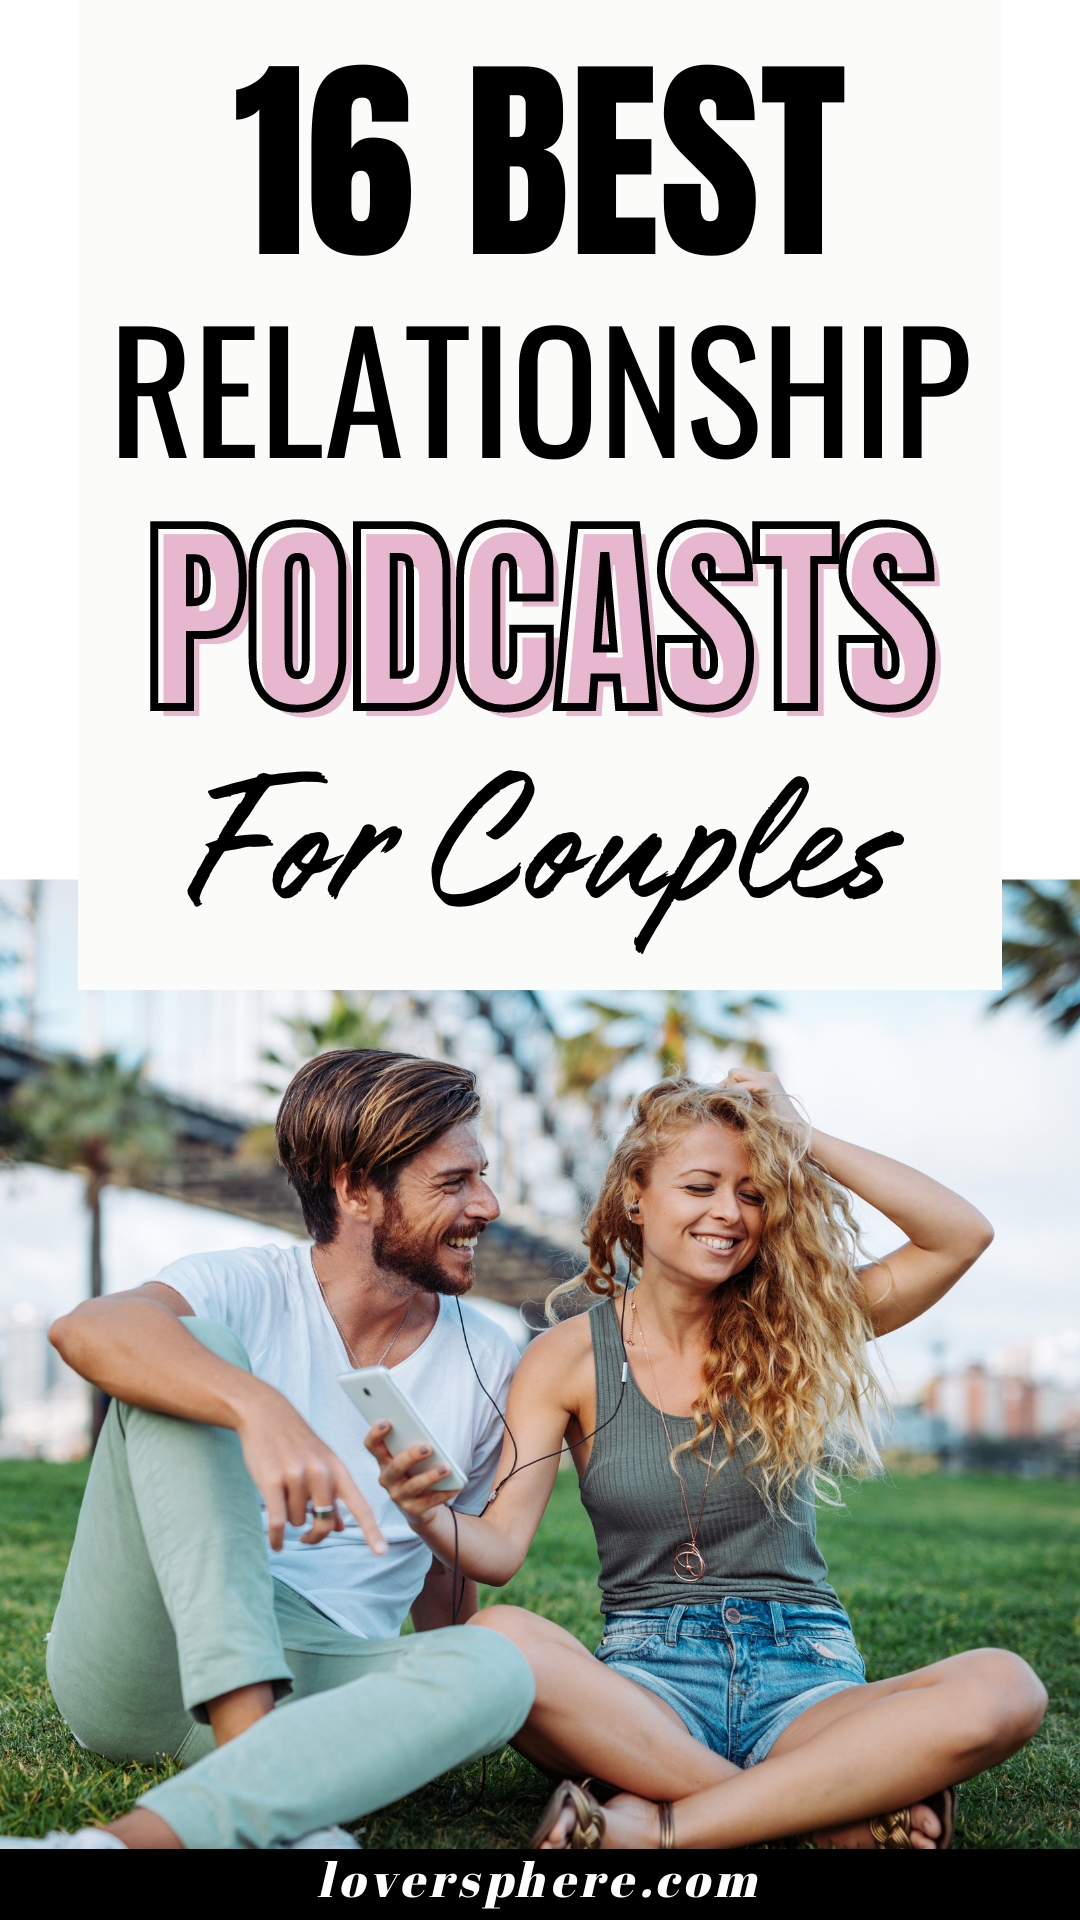 relationship podcasts